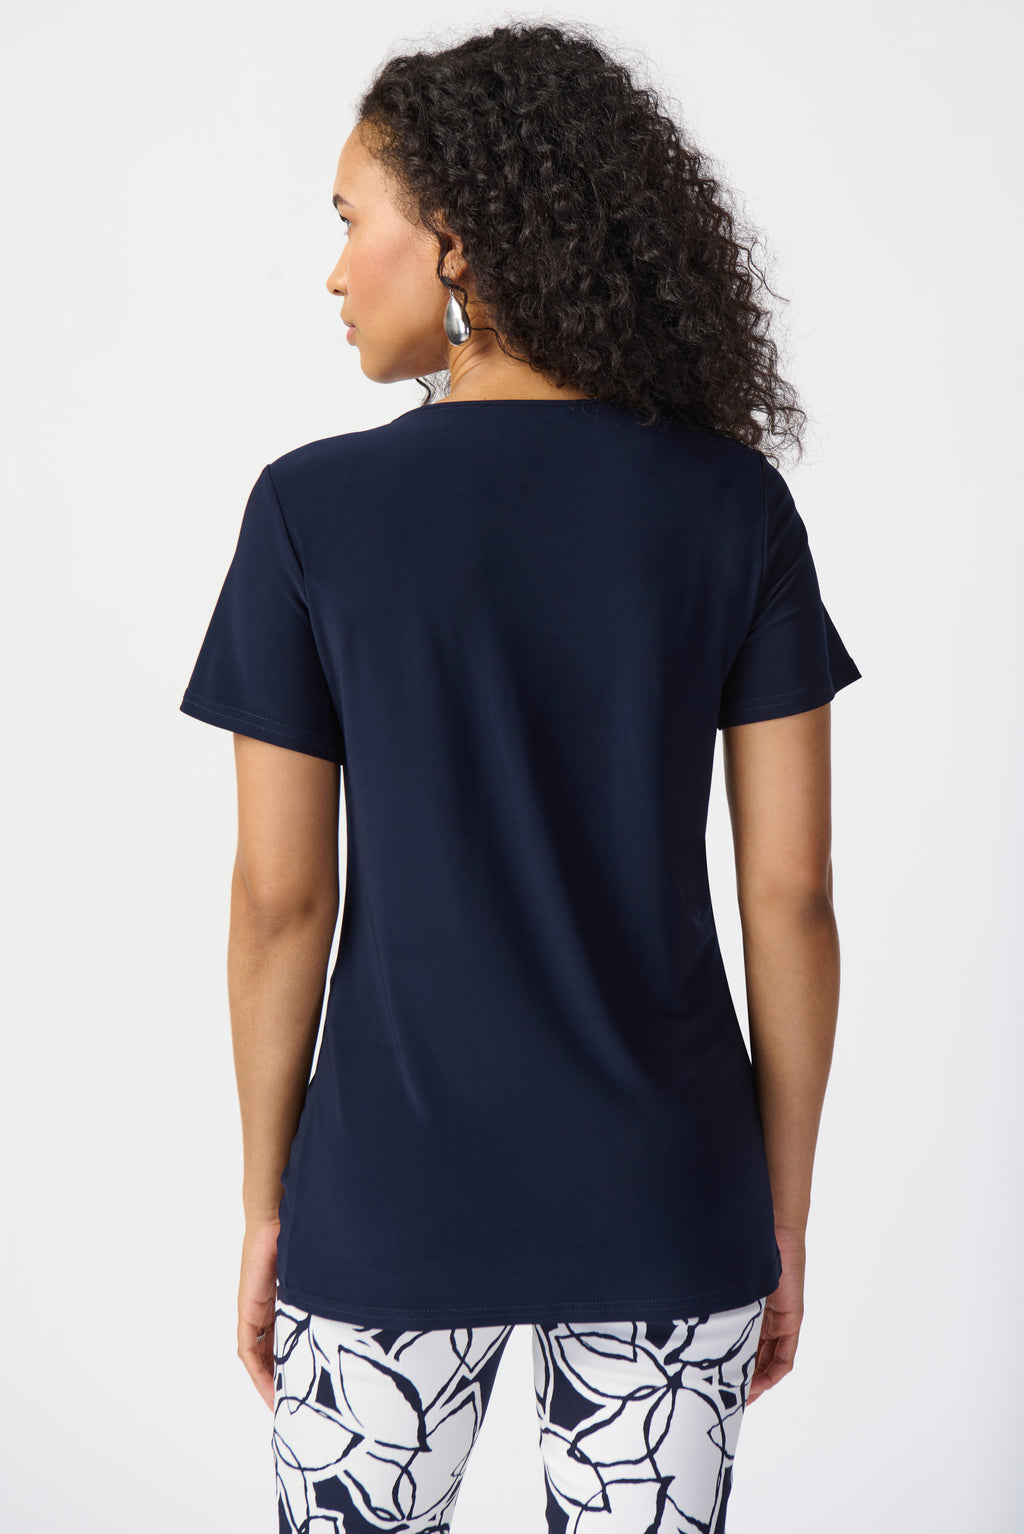 Joseph Ribkoff Midnight Blue Top with Knot Detail Style 241290